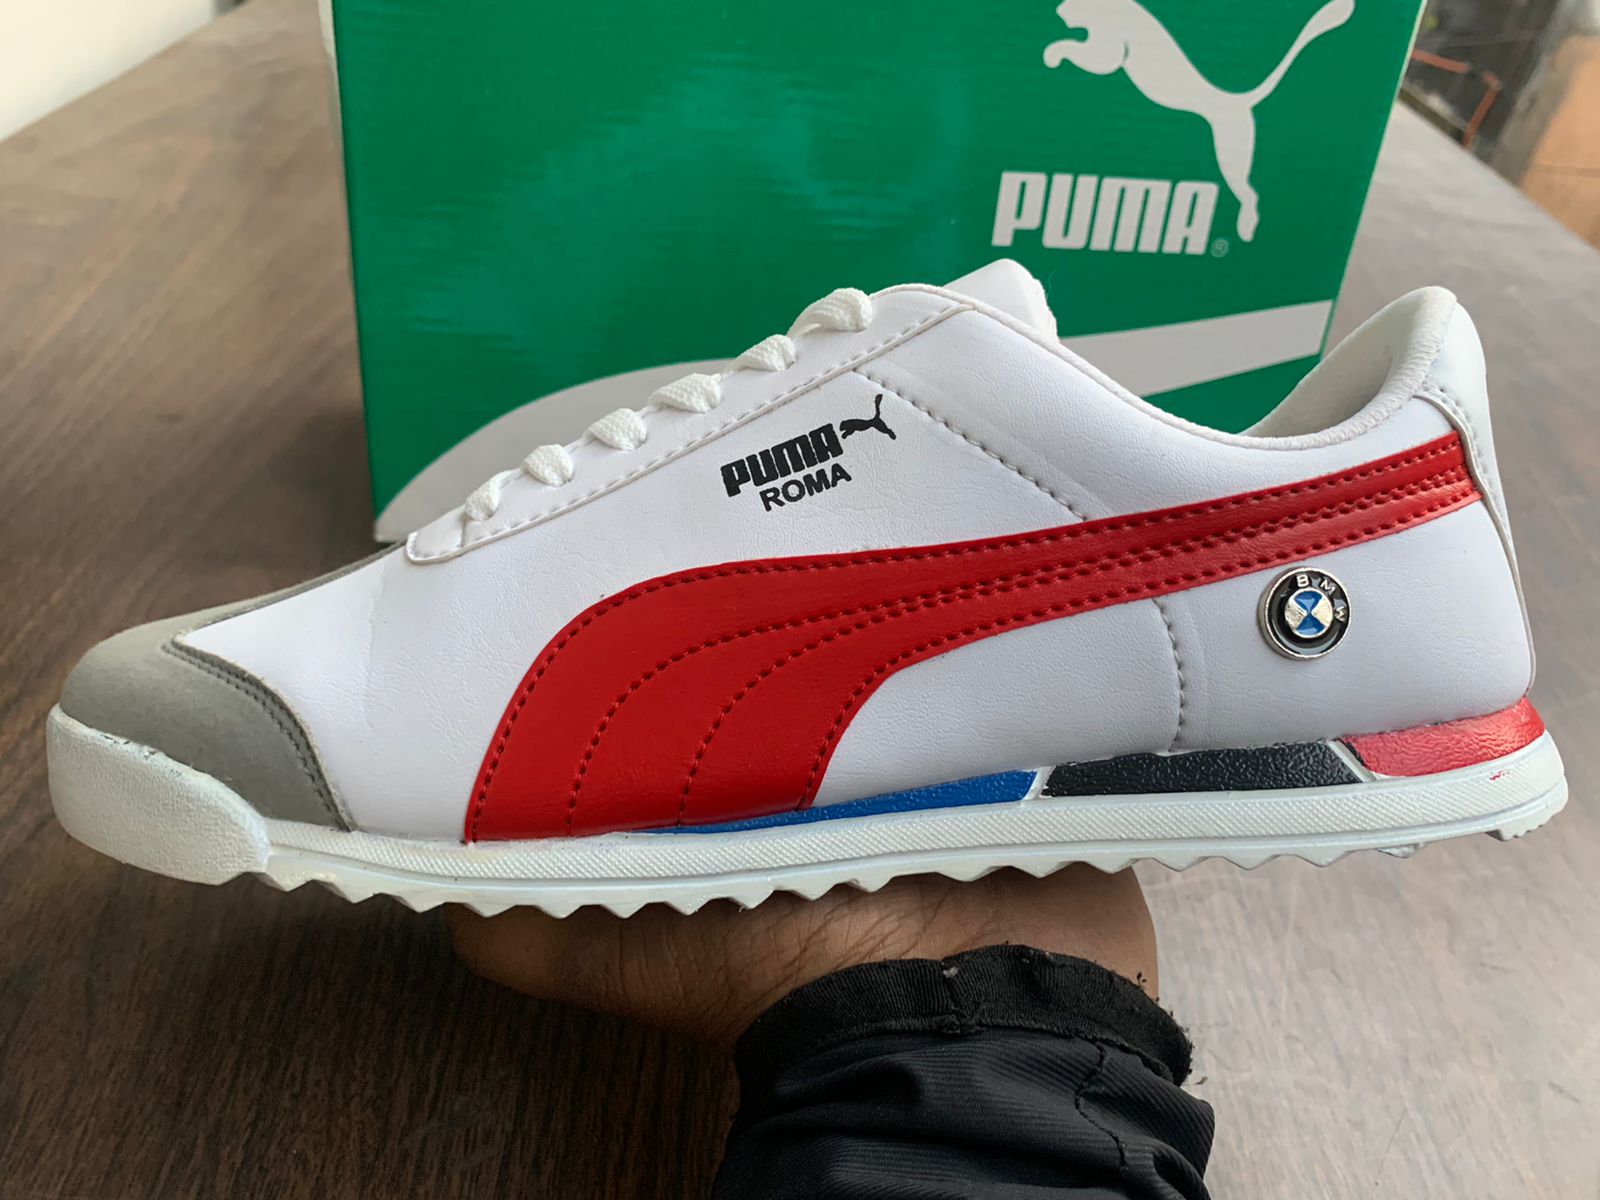 Shop Puma roma bmw copy shoes-5A quality | shoeseller.in